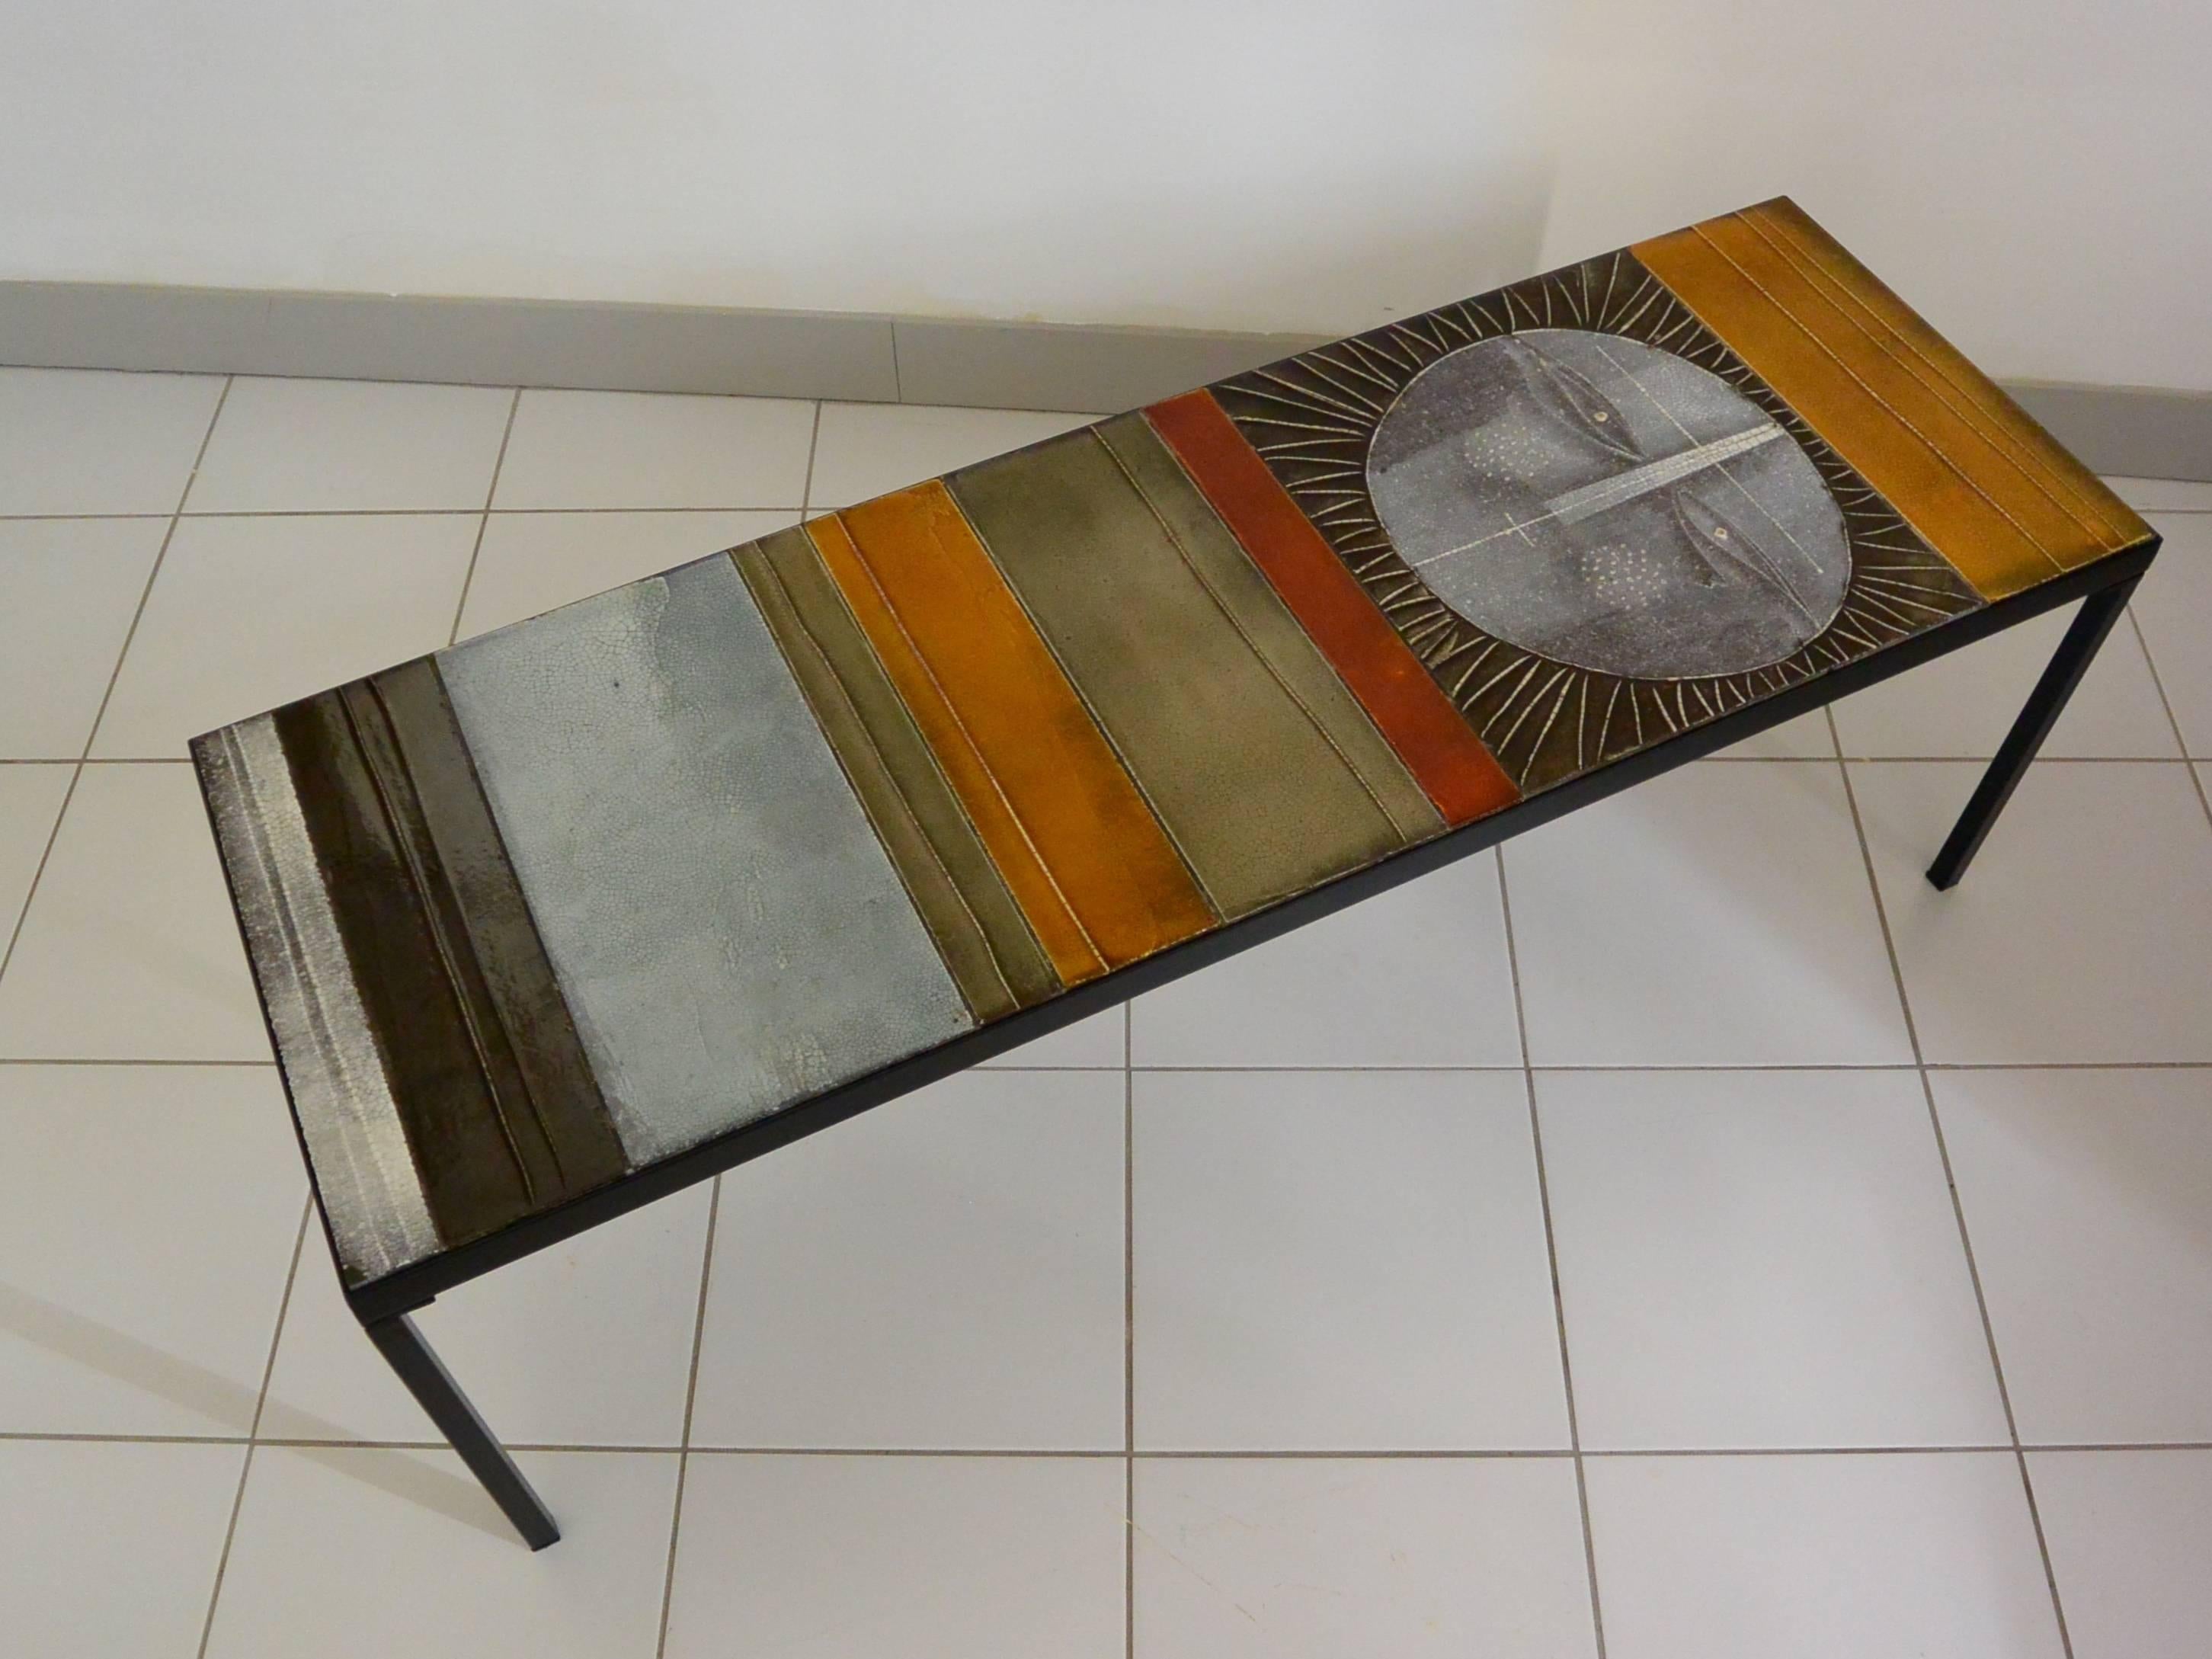 Rare and iconic ceramic coffee table by Roger Capron.
Polychrome glazed lava tiles, decorated with a stylized Sun face.
Manufactured, circa 1960.
Metal, ceramic and wood.